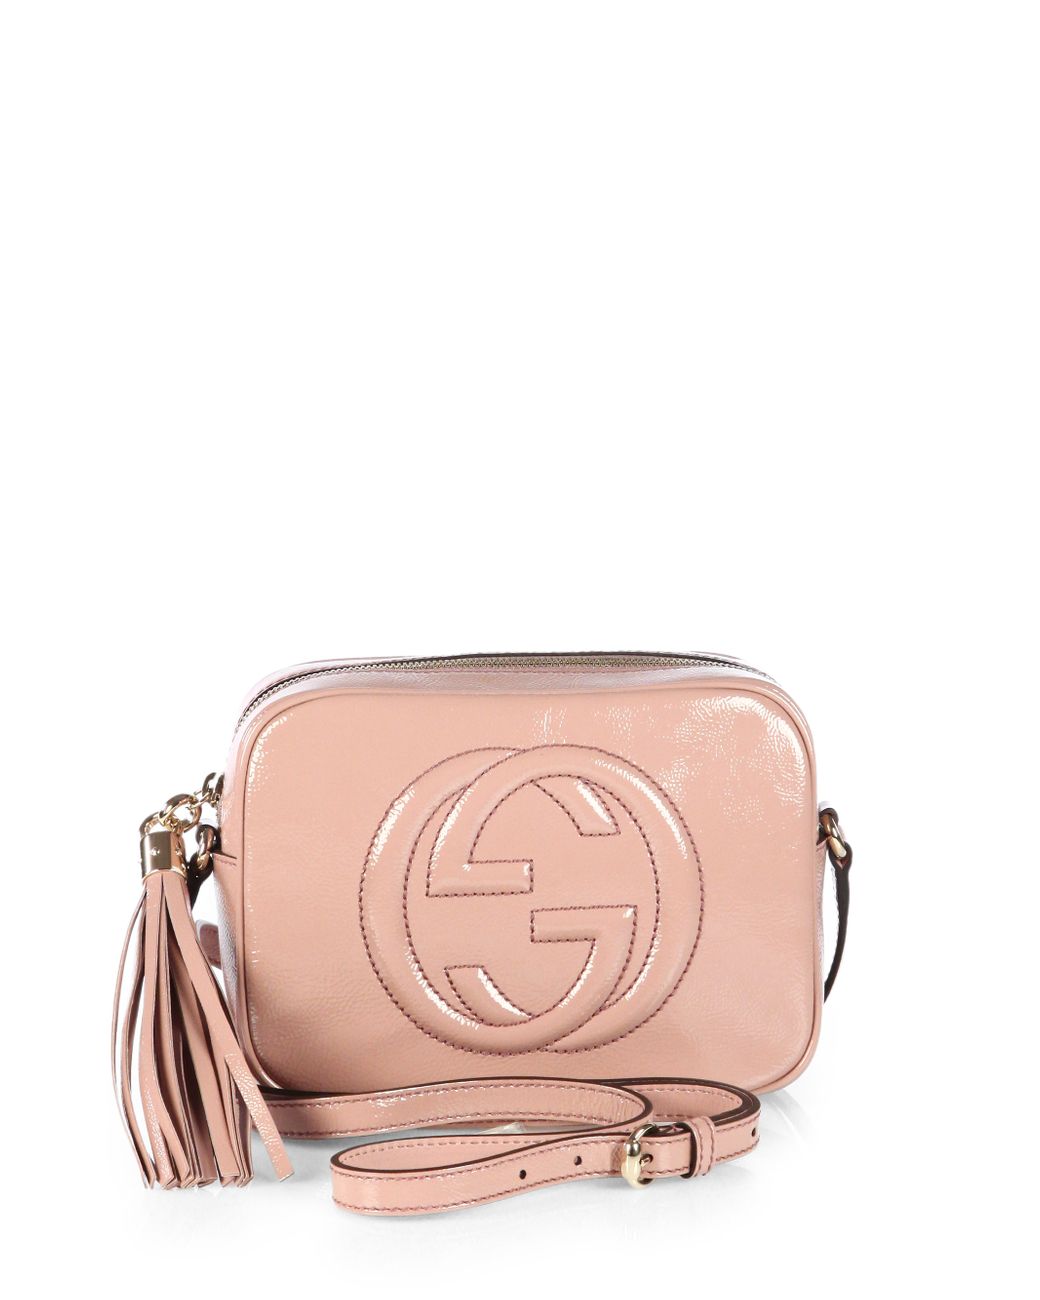 Gucci Soho Patent Leather Disco Bag in Pink